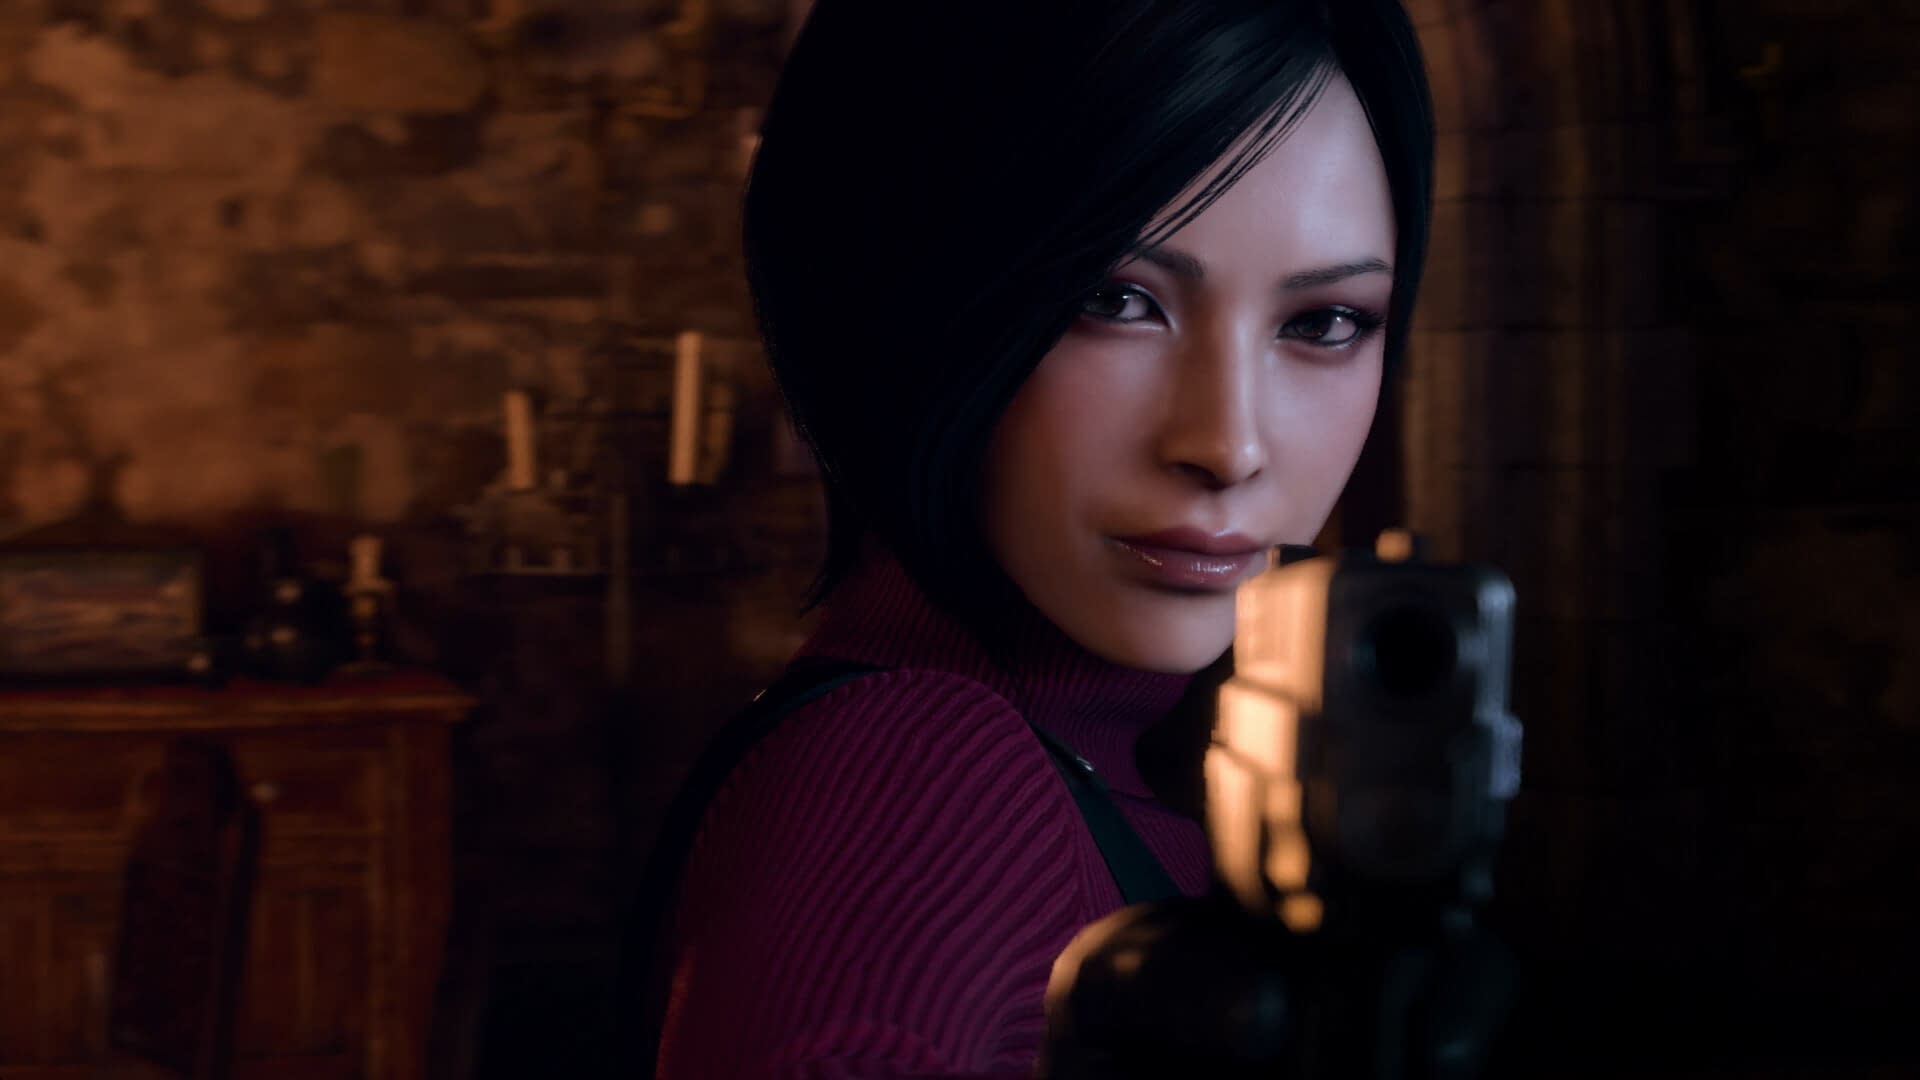 Resident Evil 4 images from Ada Wong, located in Remake are leaked